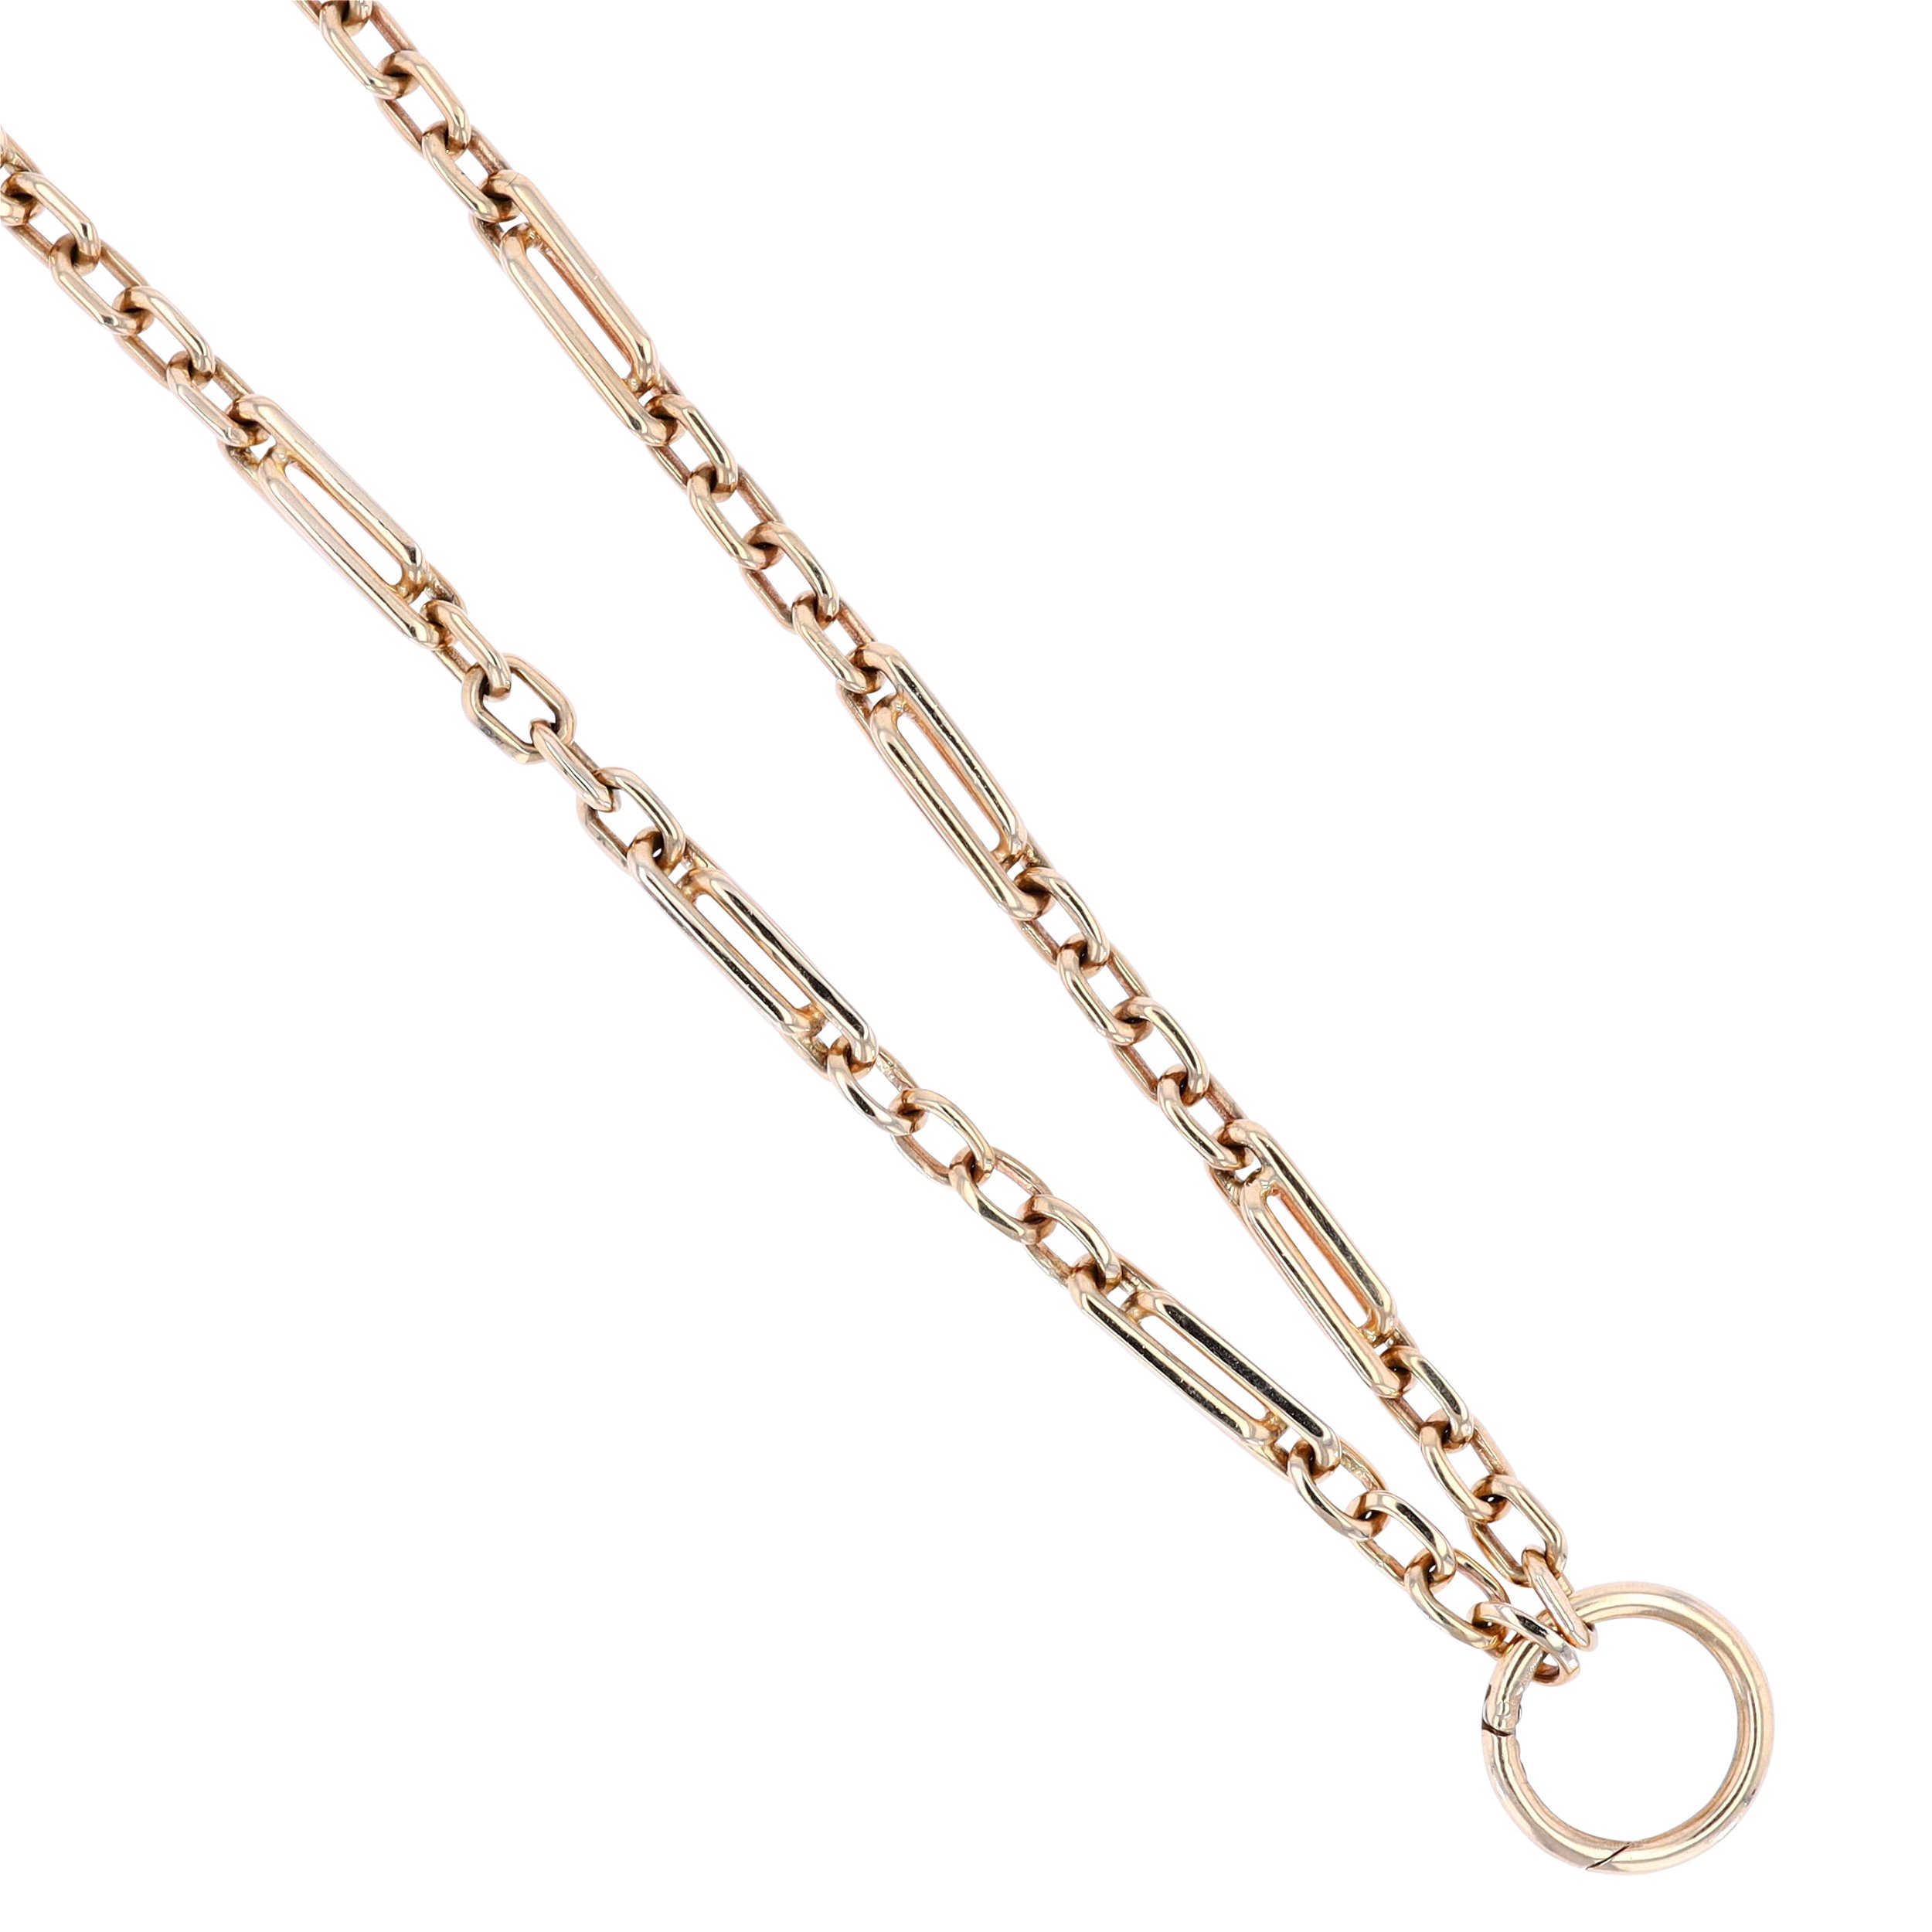 14k Vintage Look Watch Fob Chain with Openable Circle Bale